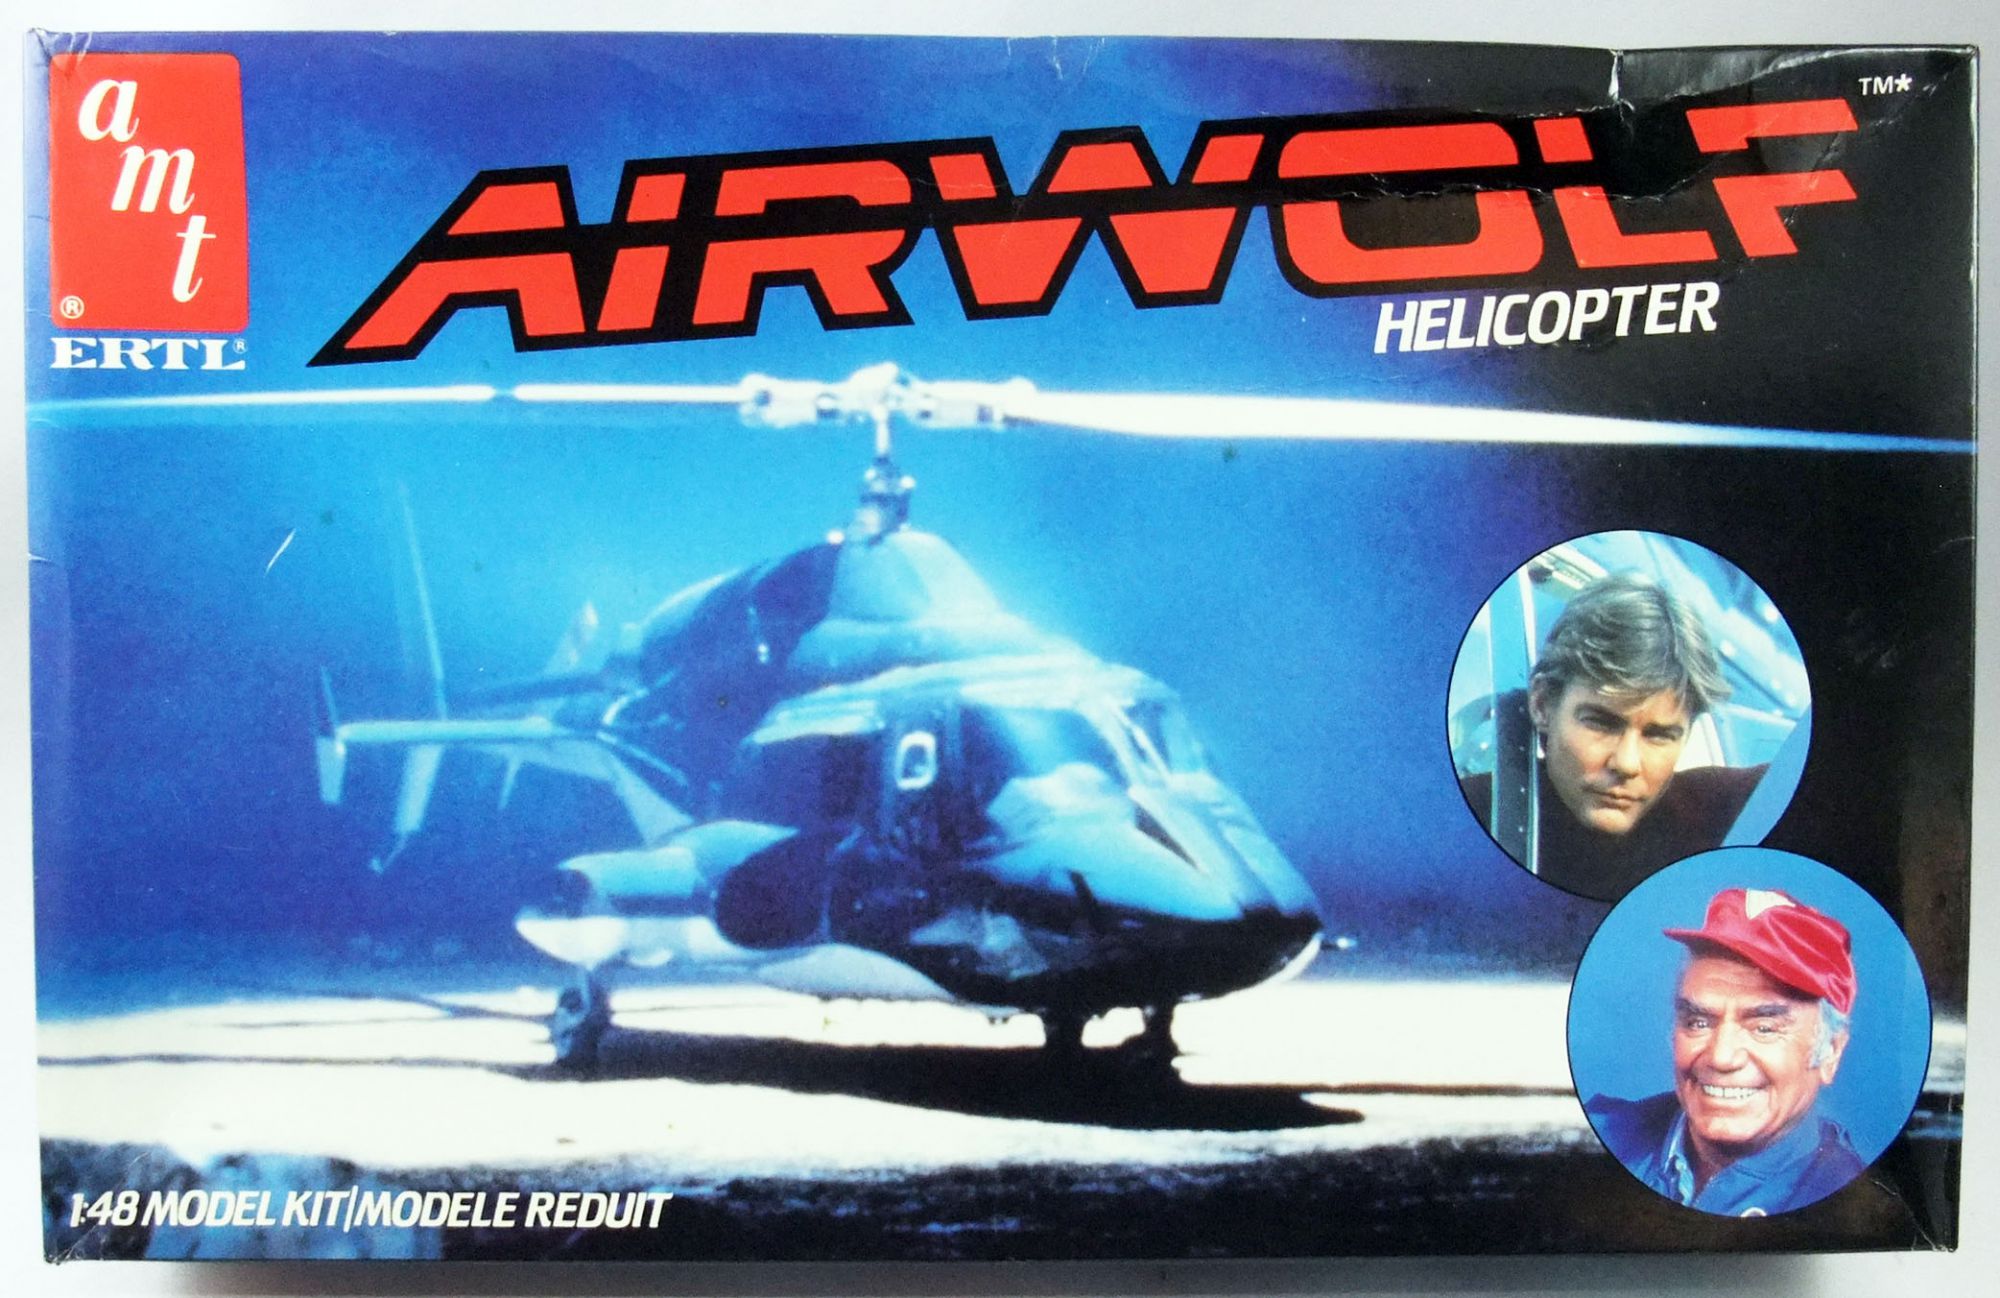 MAQUETTE BOIS AIRWOLF-SUPERCOPTER